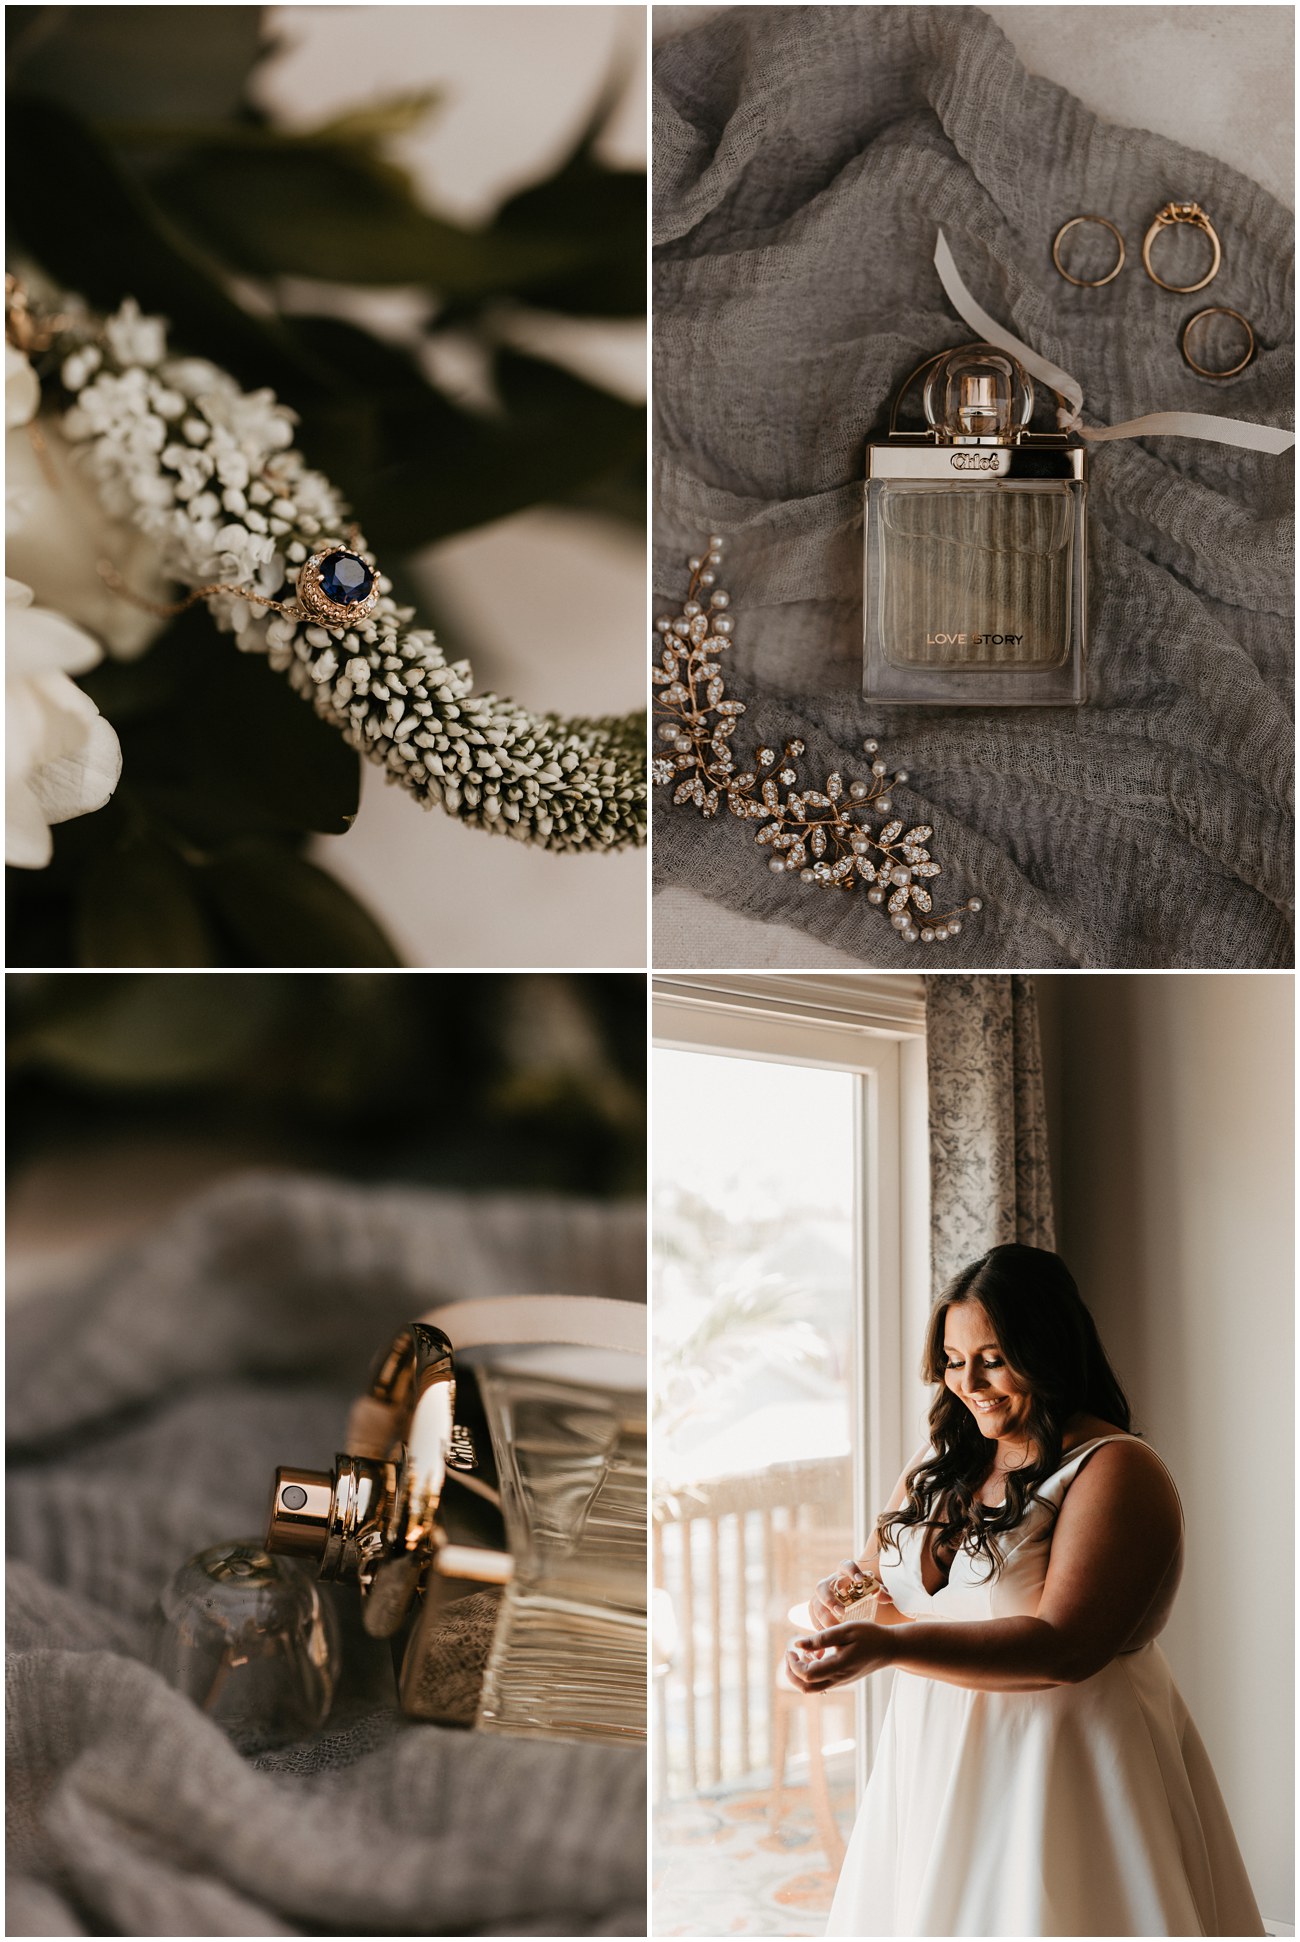 Collage of bridal details and Bride applying her perfume